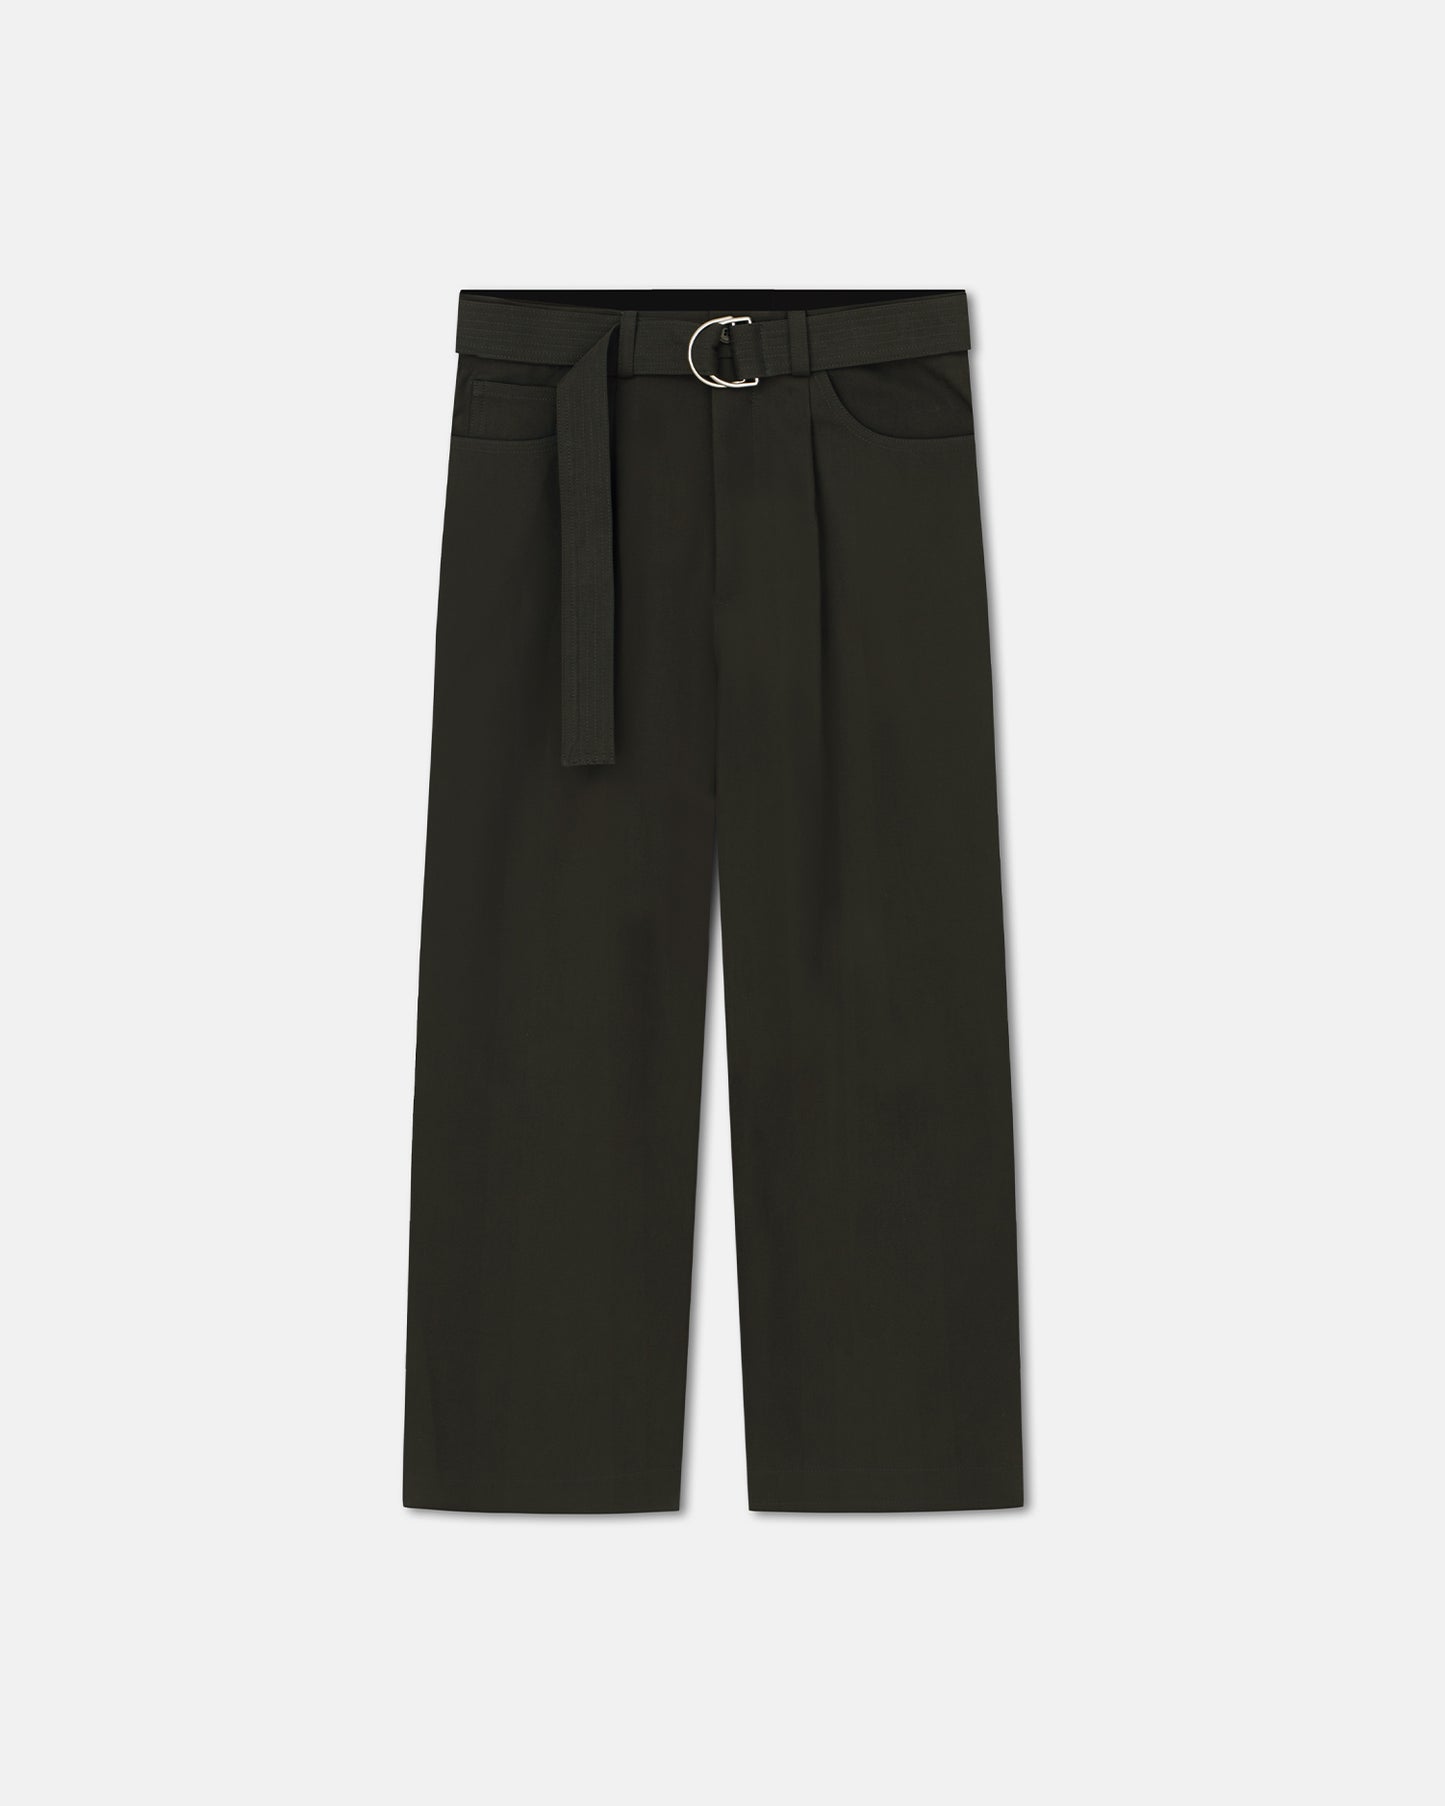 Ferre - Belted Structured Twill Pants - Anthracite